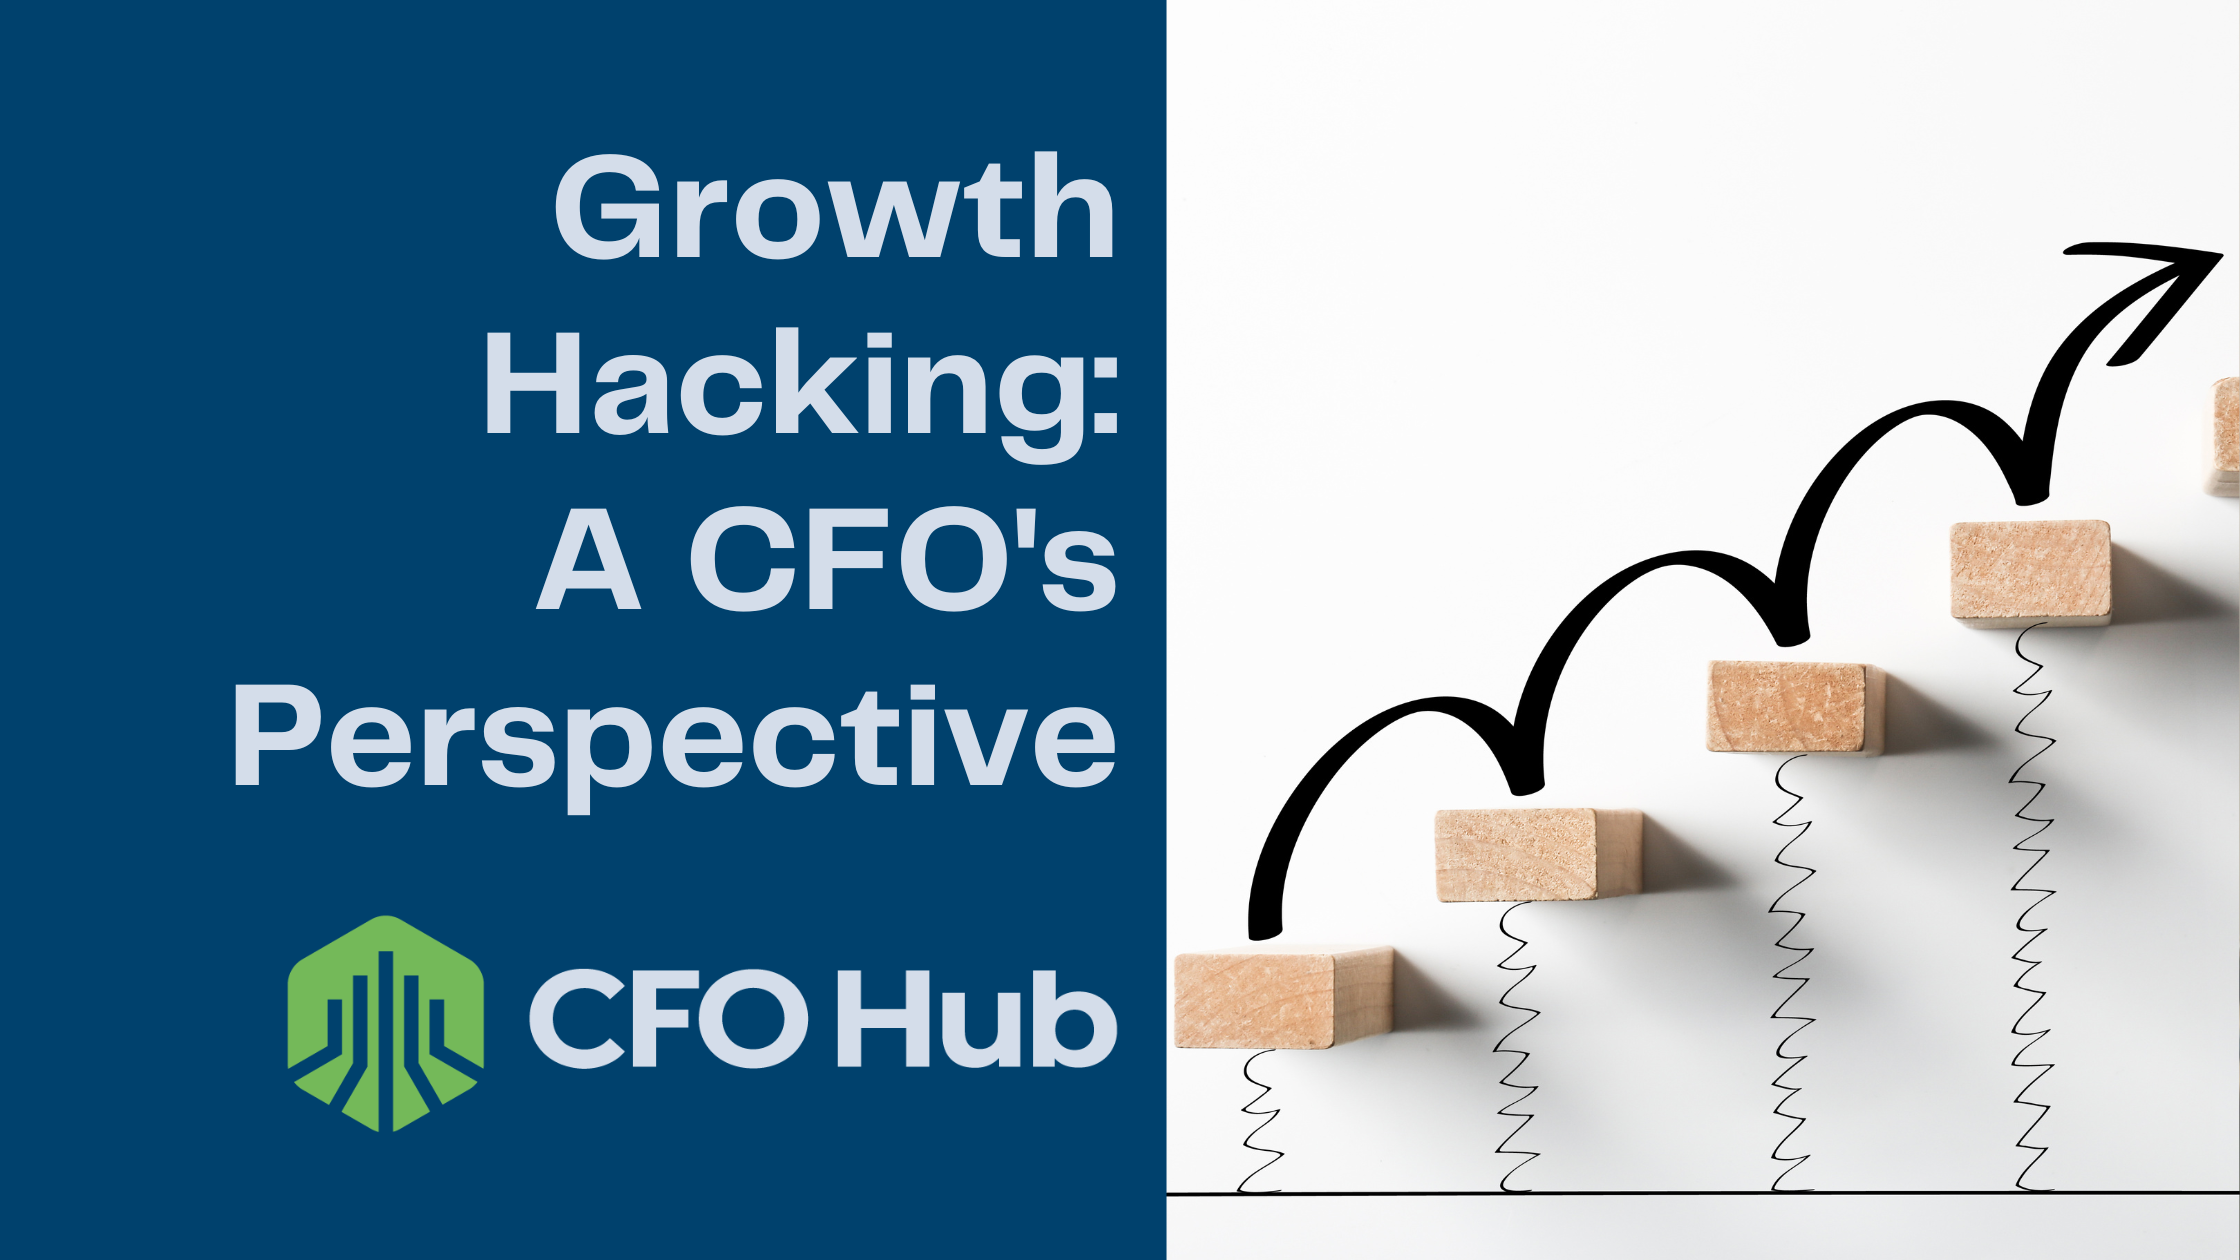 A graphic showing a series of ascending steps made of wooden blocks arranged in front of a white background with a black upward arrow forming a growth pattern. On the left, there's a blue panel with the text "Growth Hacking: A CFO's Perspective" and the "CFO Hub" logo.